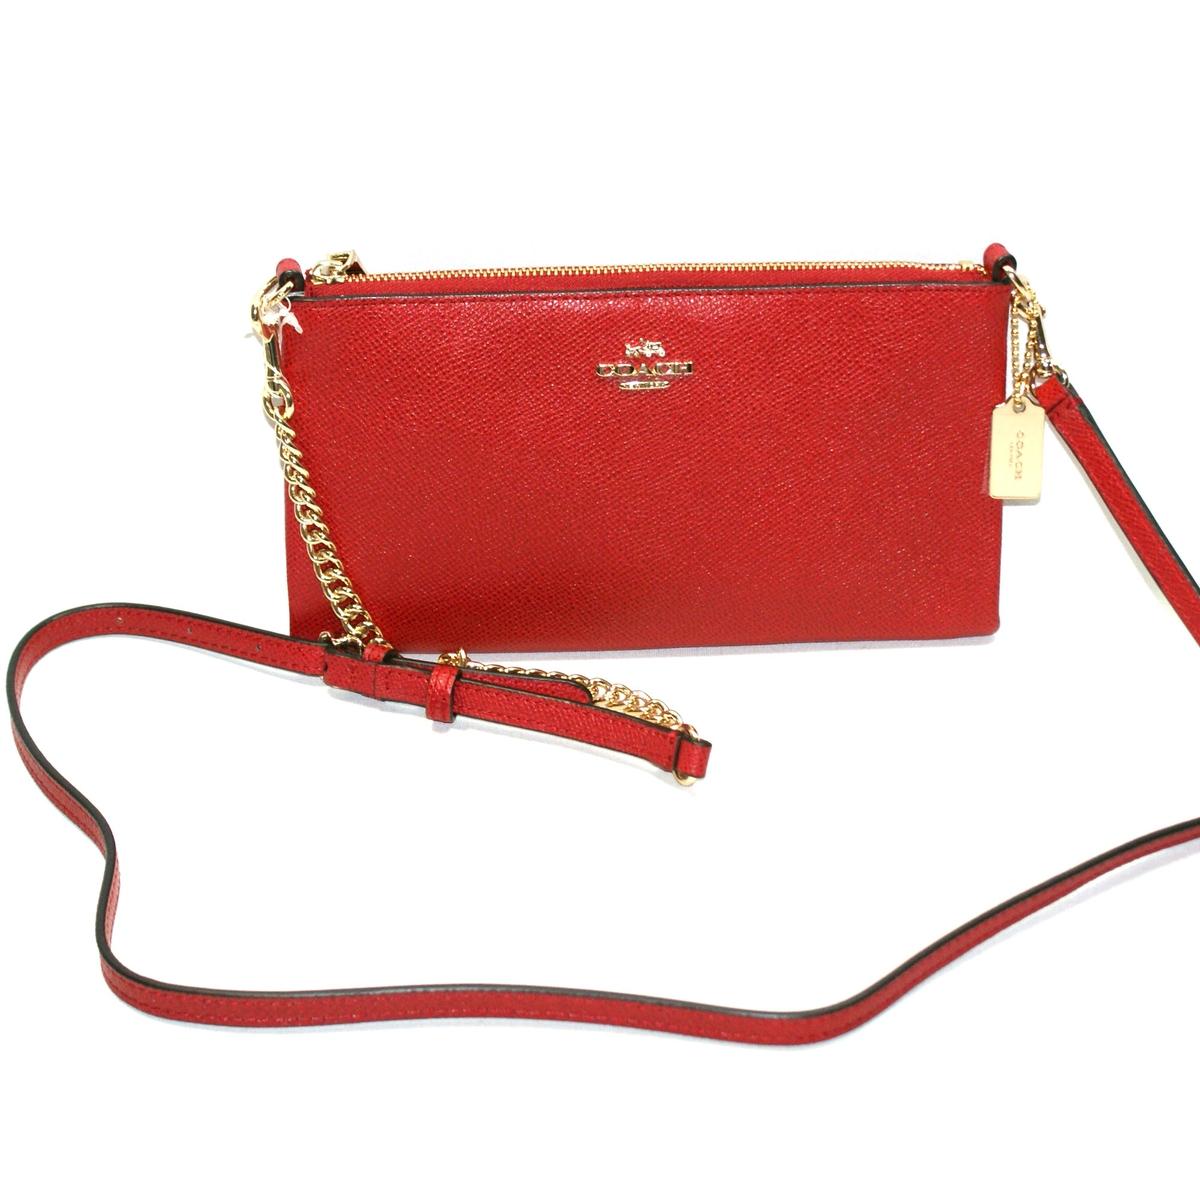 Coach Emboosed Textured Leather Kylie Crossbody Bag Red Currant #52385 | Coach 52385